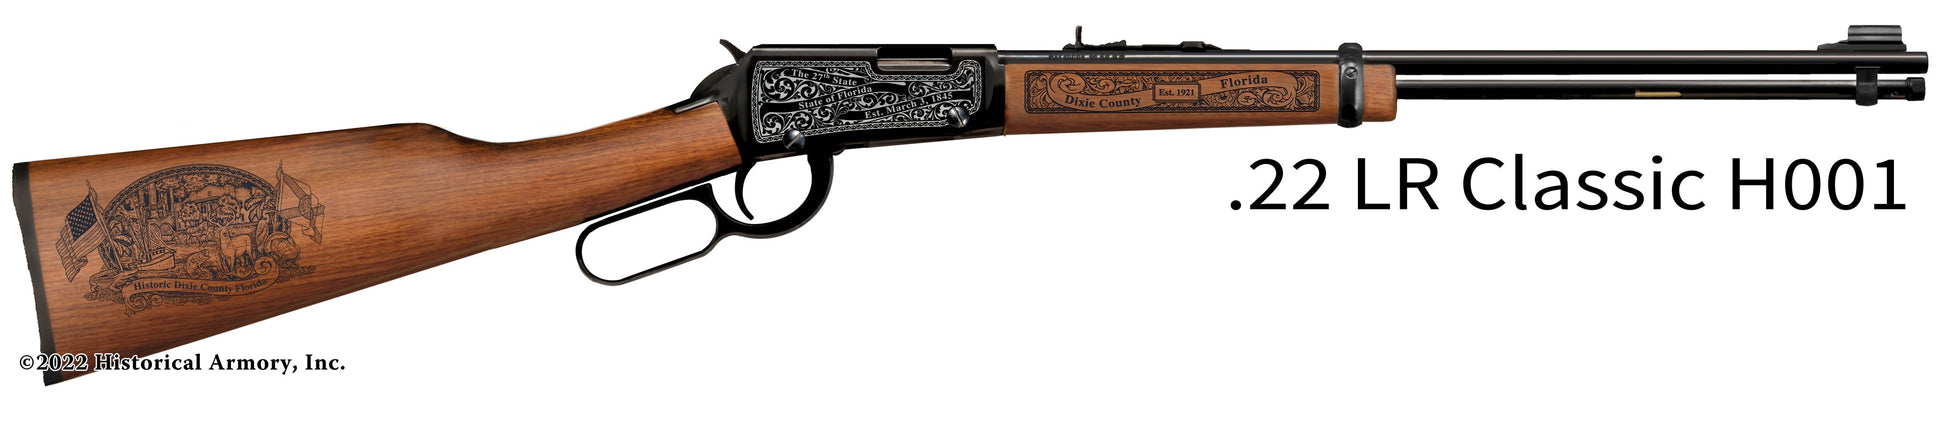 Dixie County Florida Engraved Henry H001 Rifle